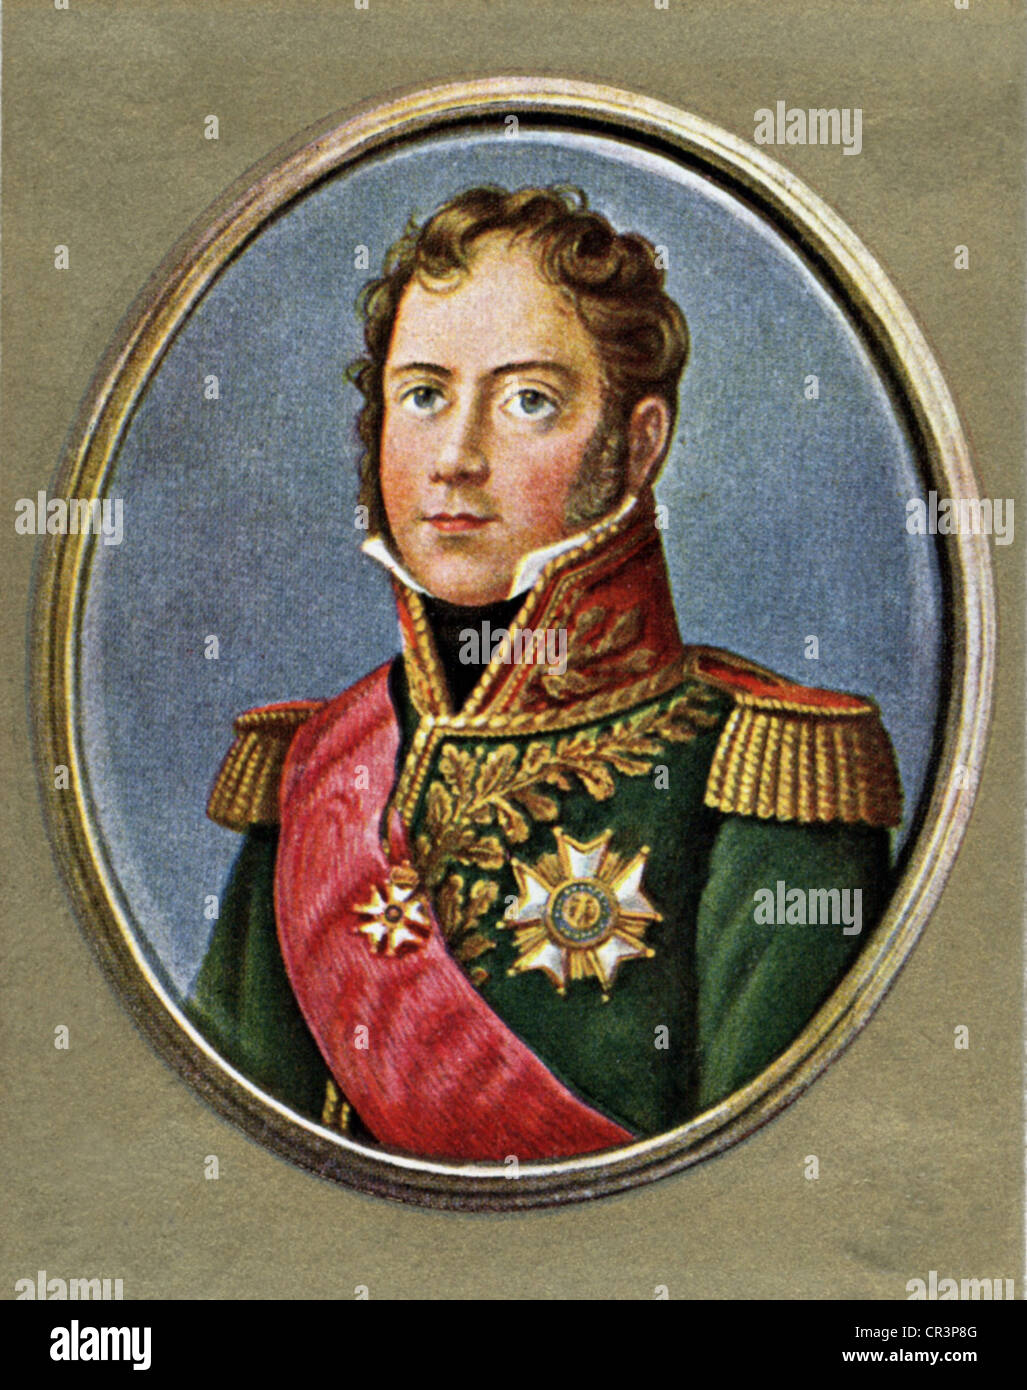 Ney, Michel, 10.1.1769 - 7.12.1815, French marshal, portrait, miniature painting, oval, Stock Photo